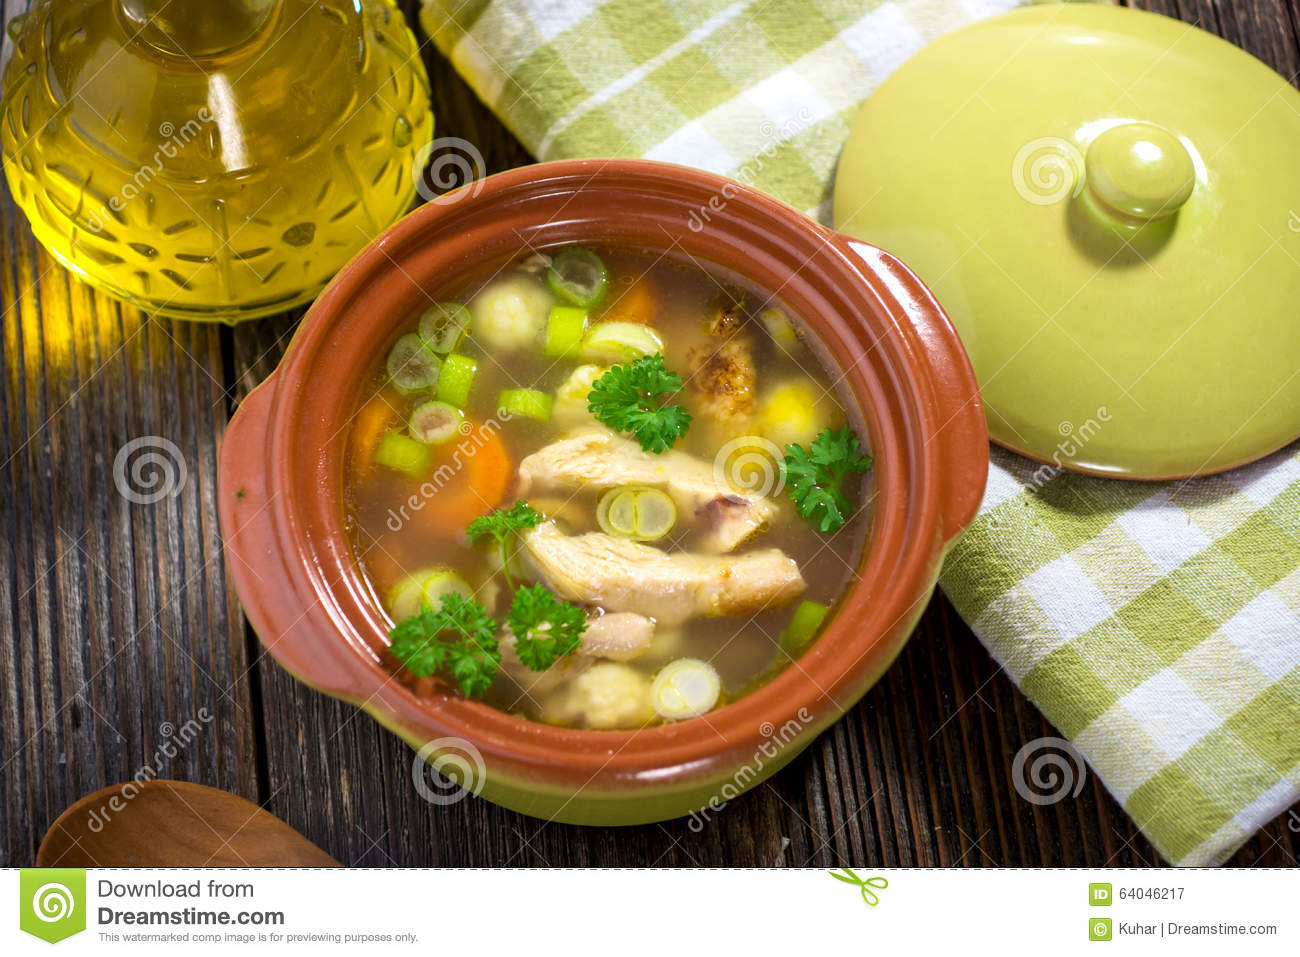 Chicken Soup Stock Photo   Image  64046217